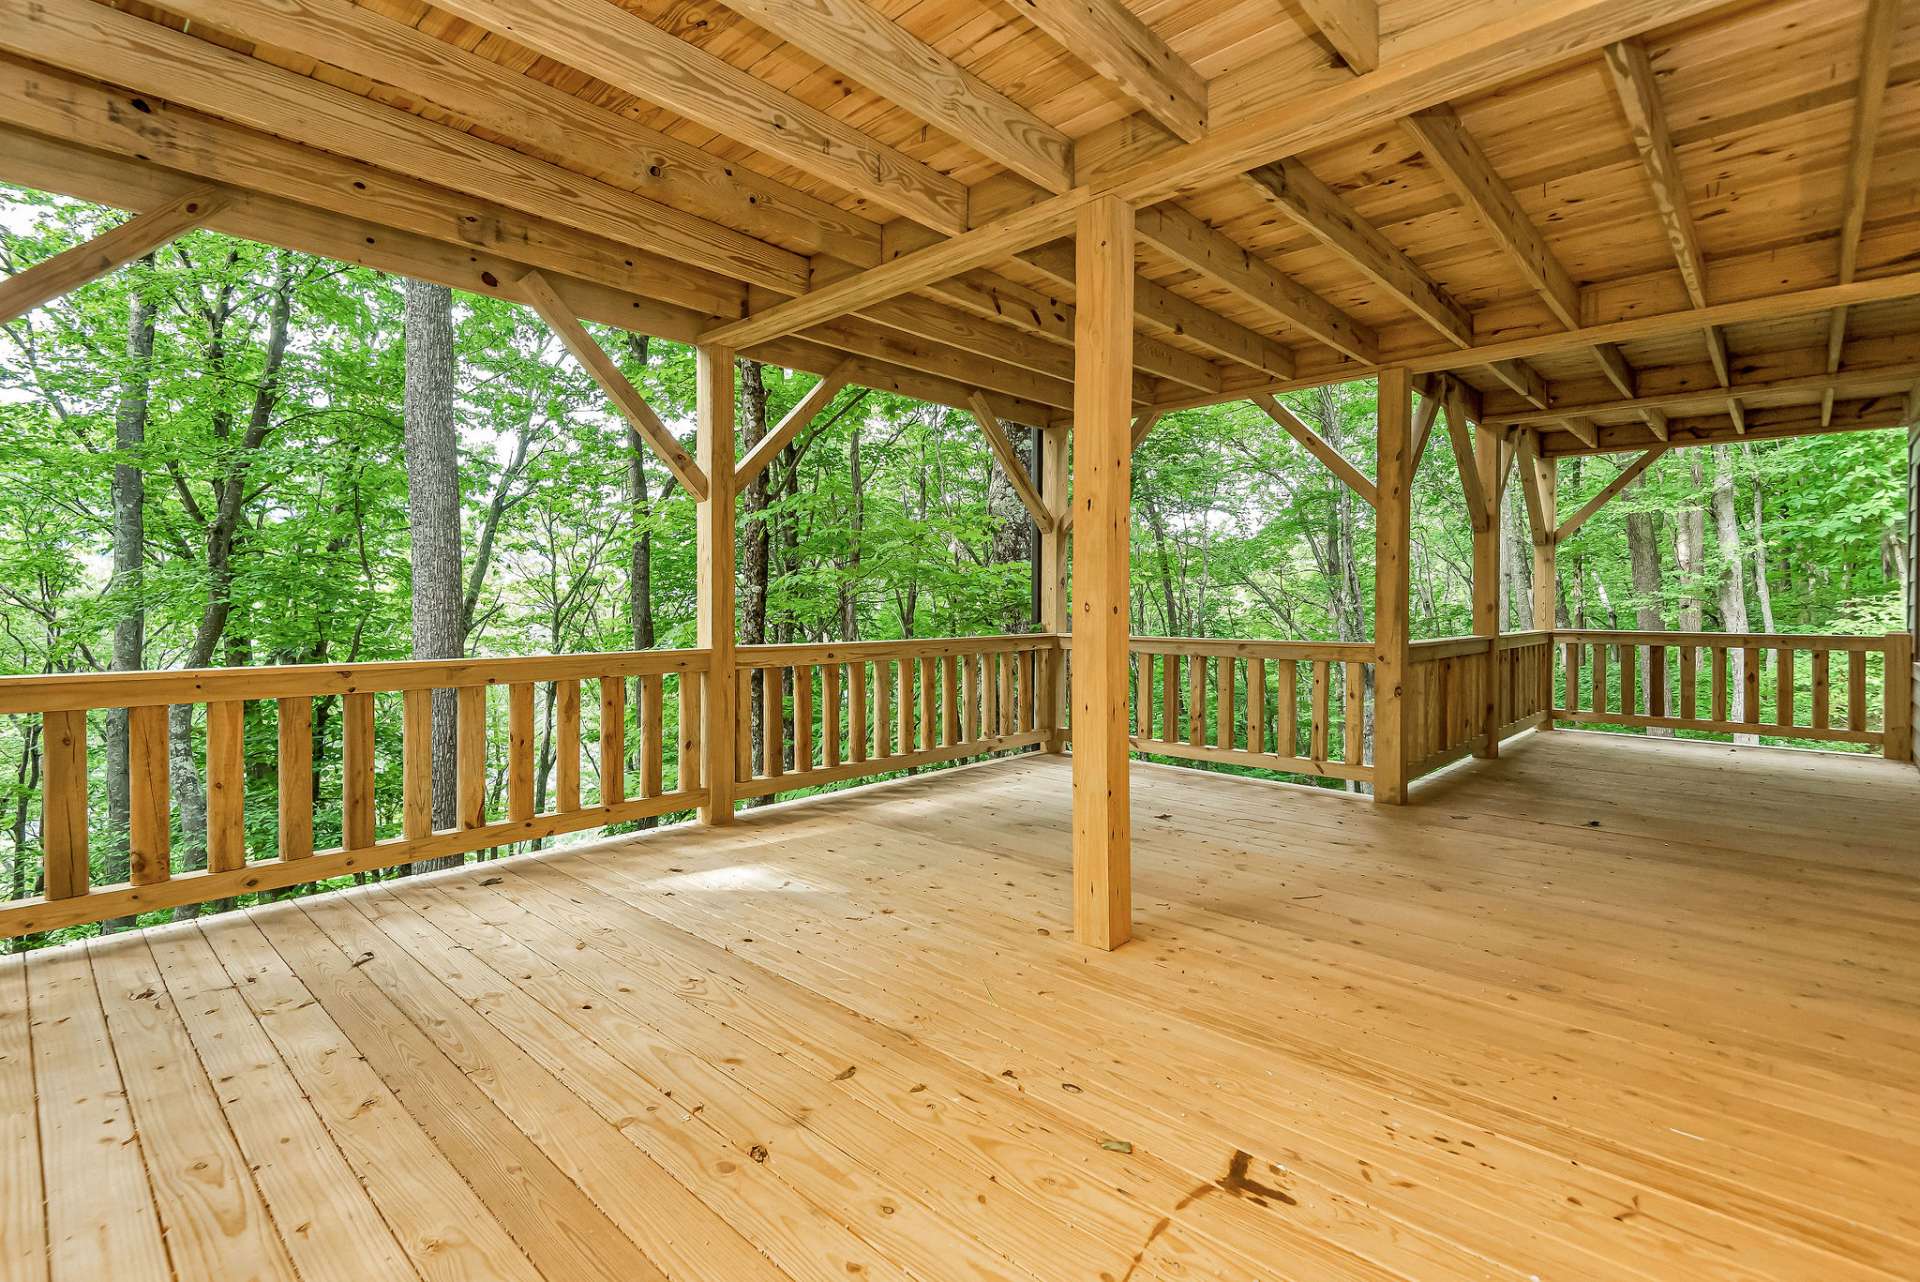 This expansive outdoor space provides a perfect setting for family or guests to immerse themselves in the fresh mountain air and soak in the tranquility of the surrounding lush forest.